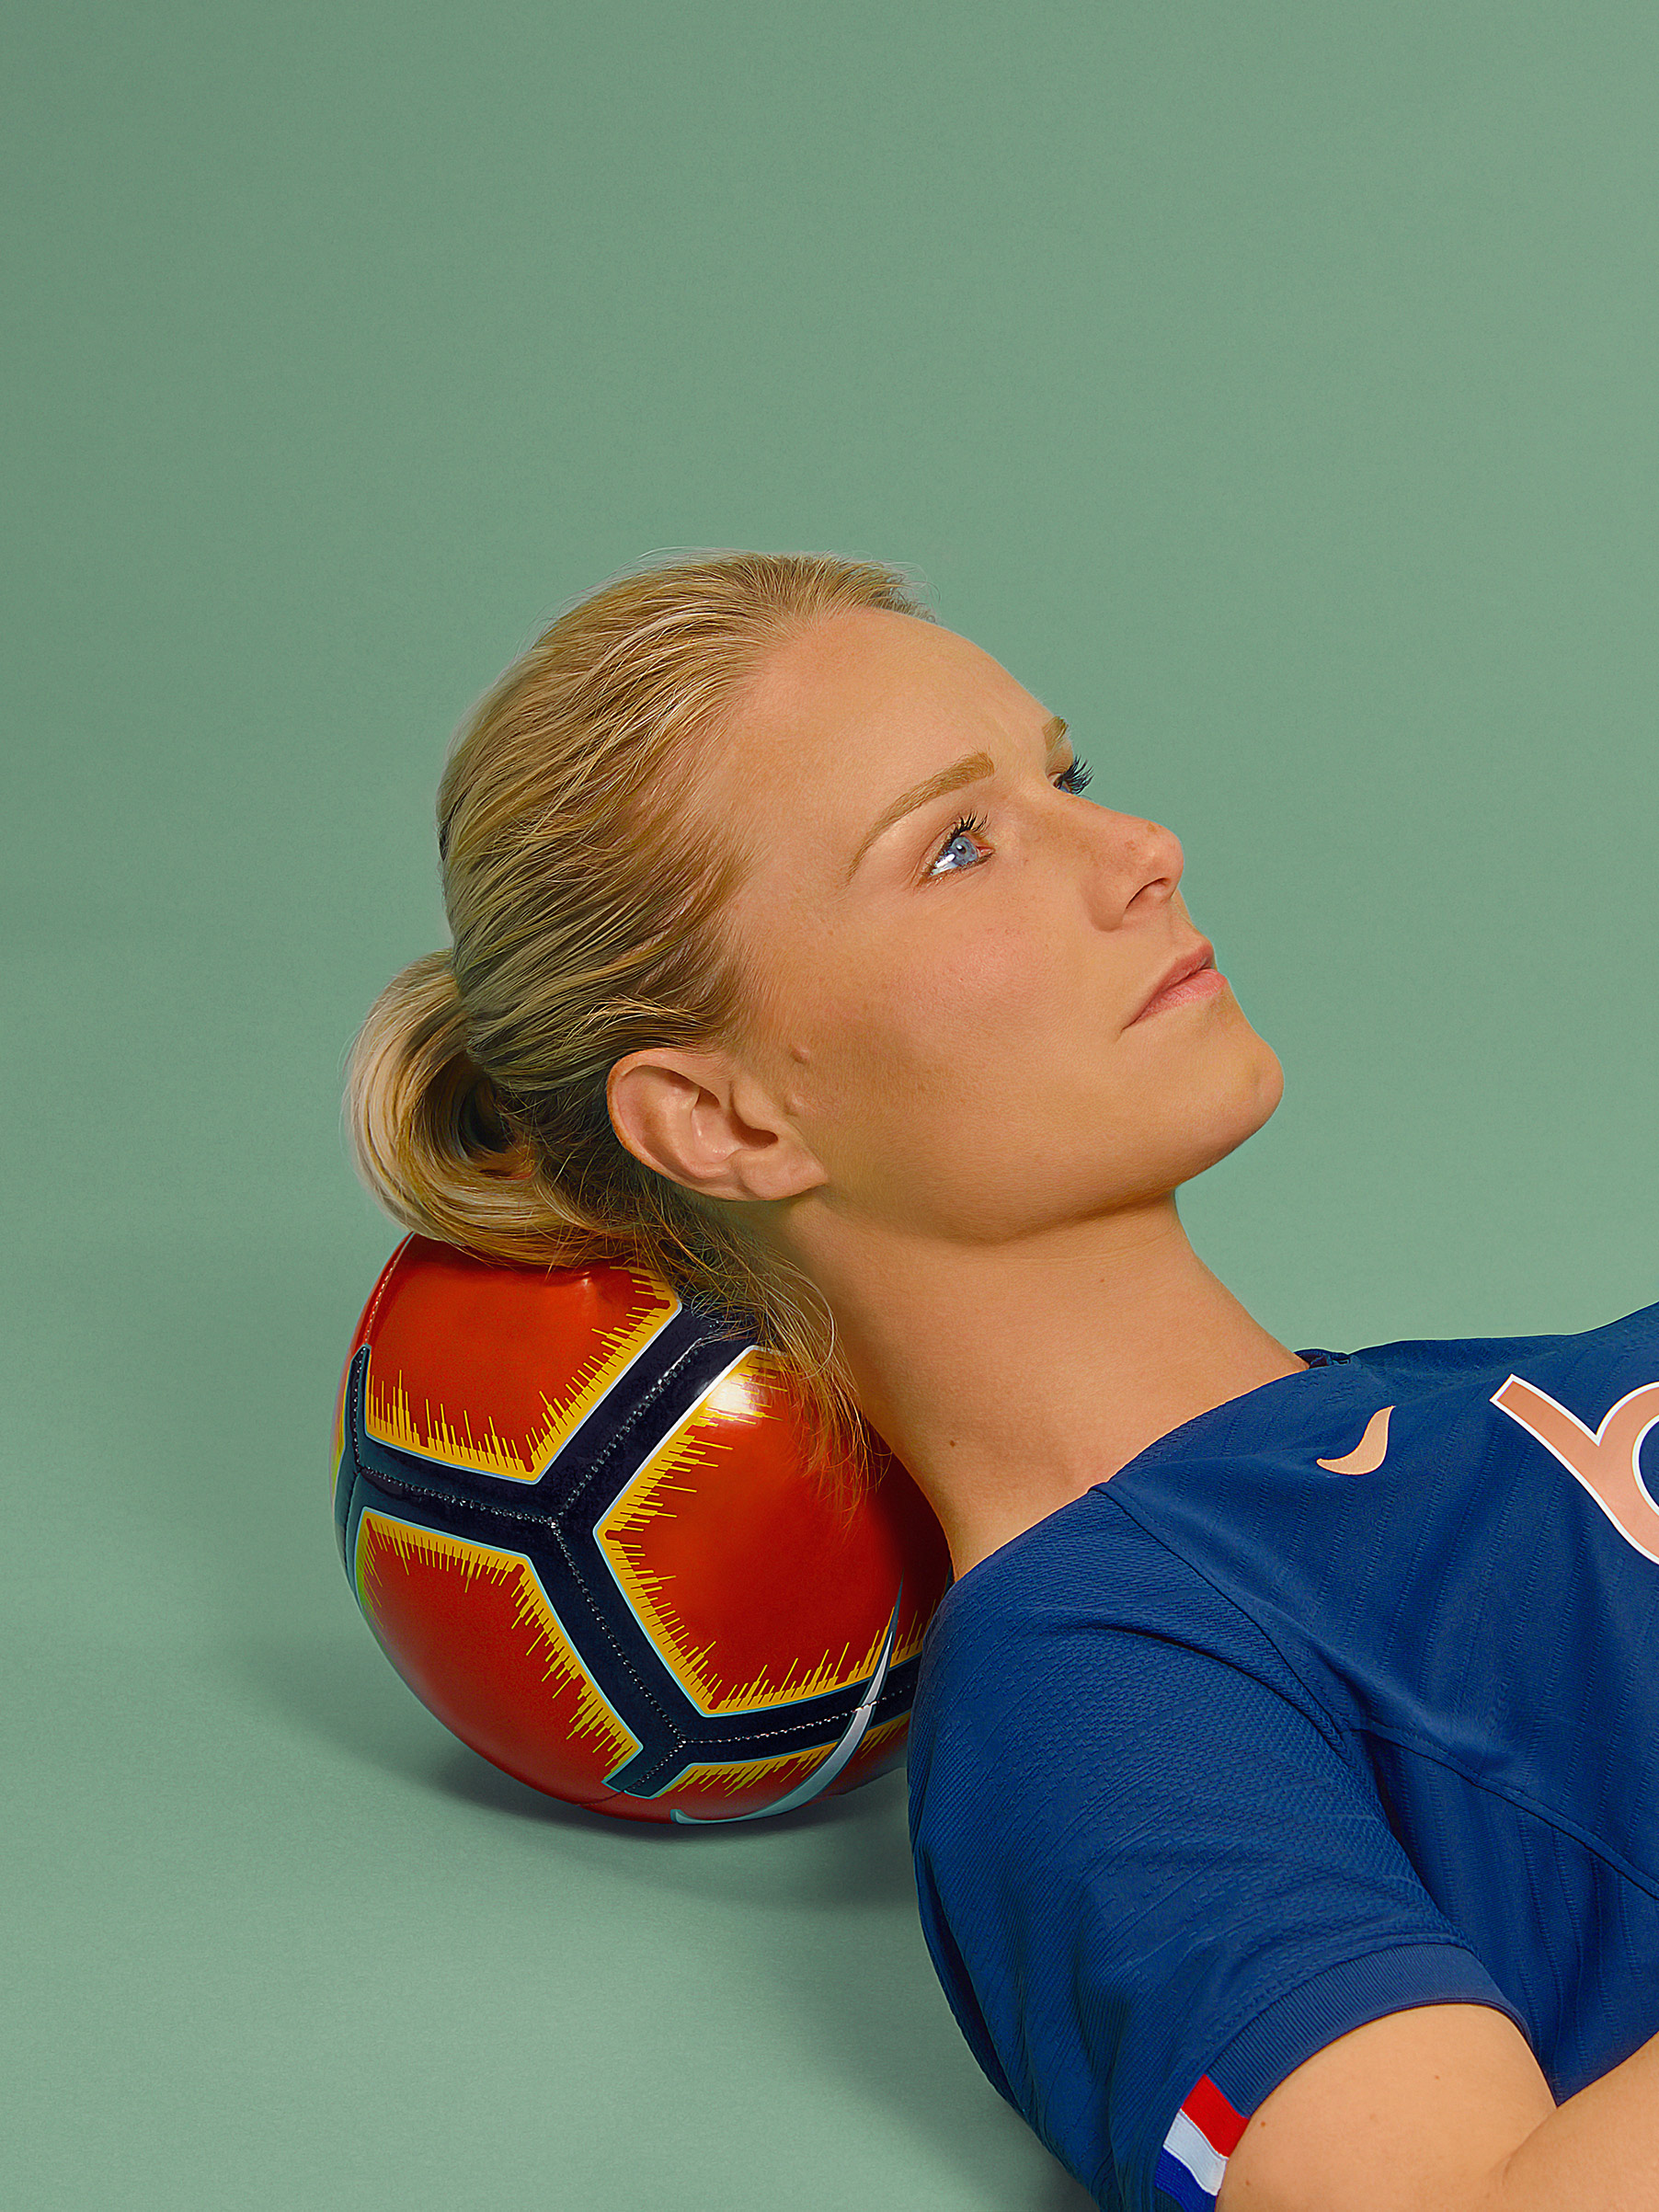 Amandine Henry. "Players to Watch," June 3 issue. (Nhu Xuan Hua for TIME)